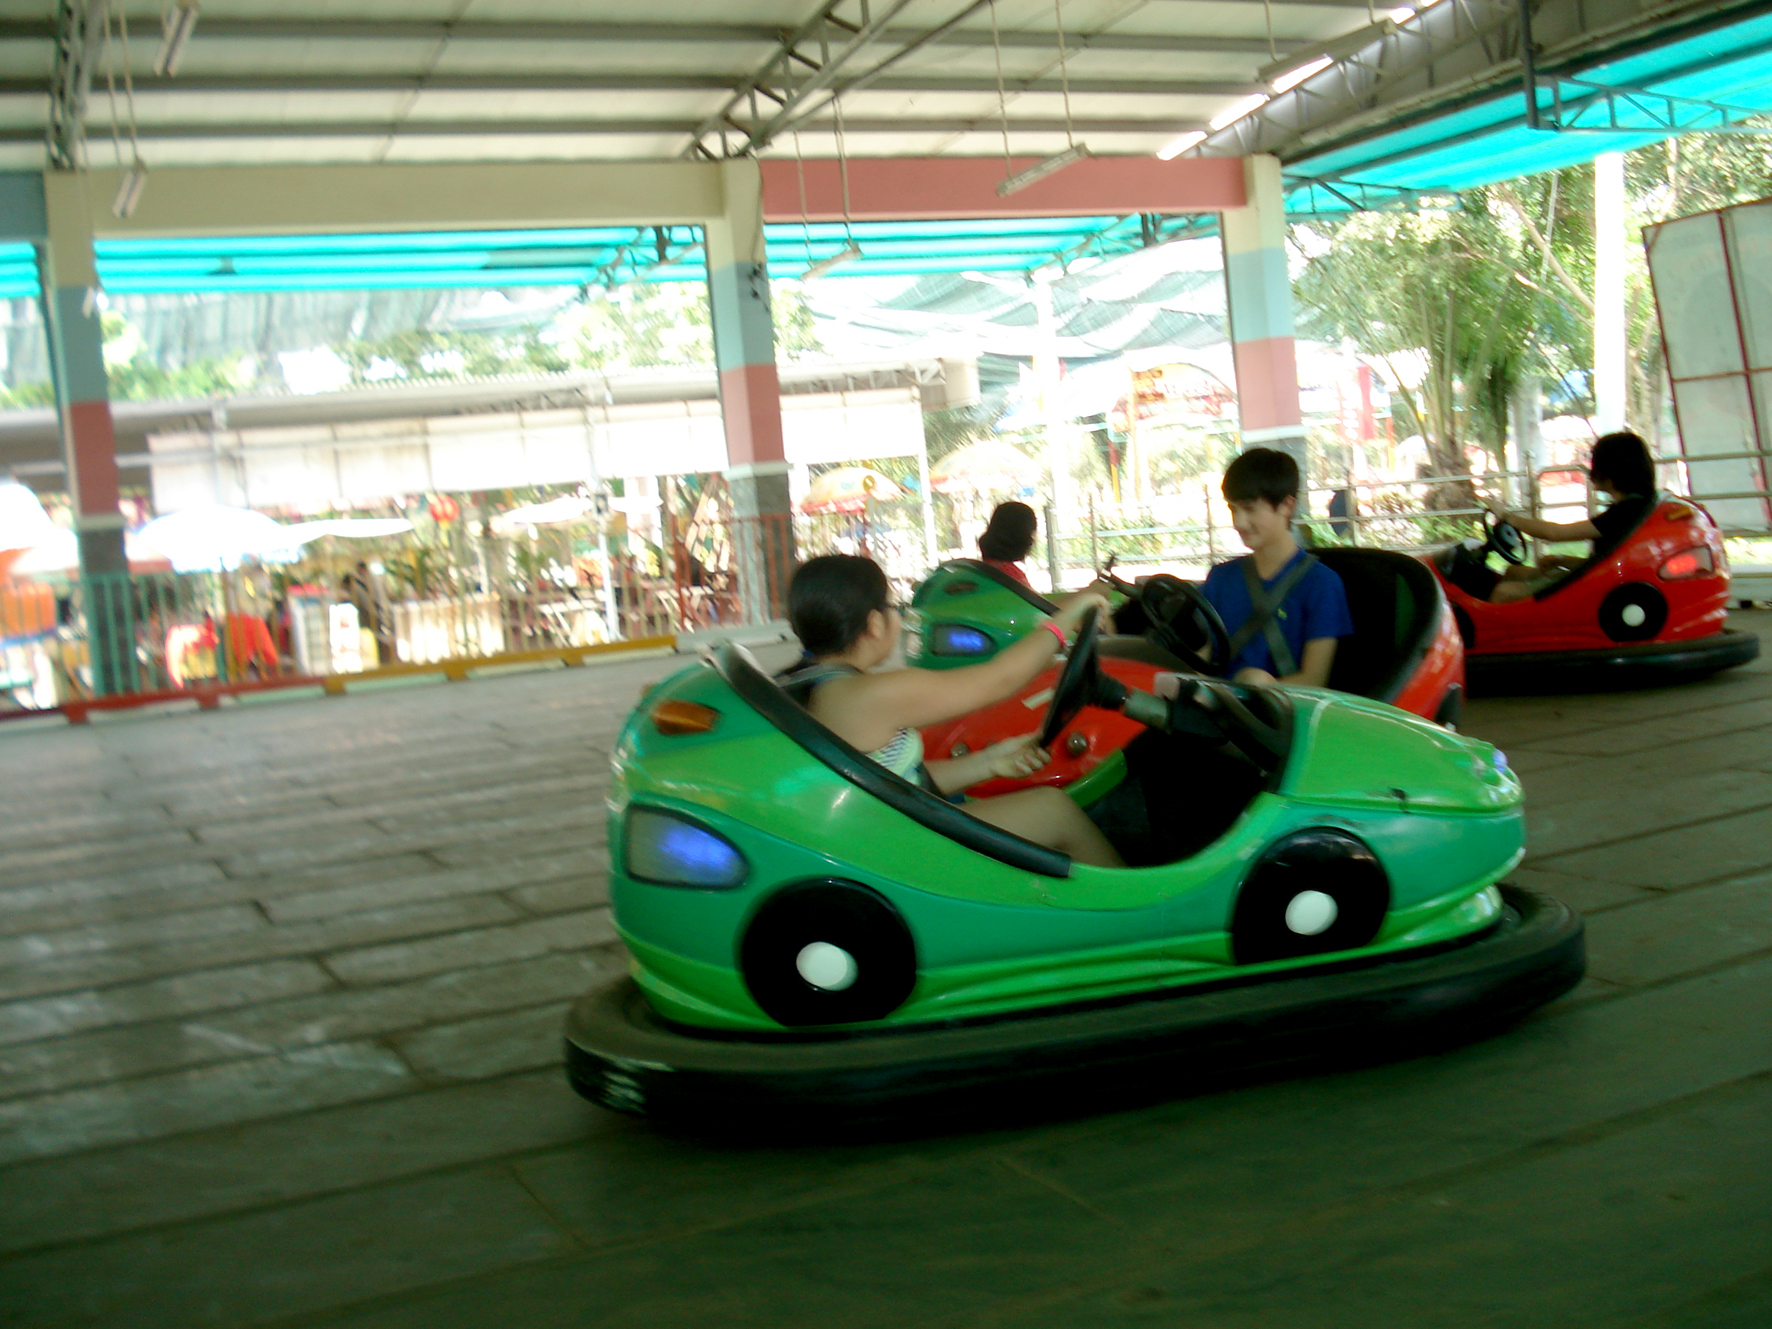 people in bumper cars at a park with others watching